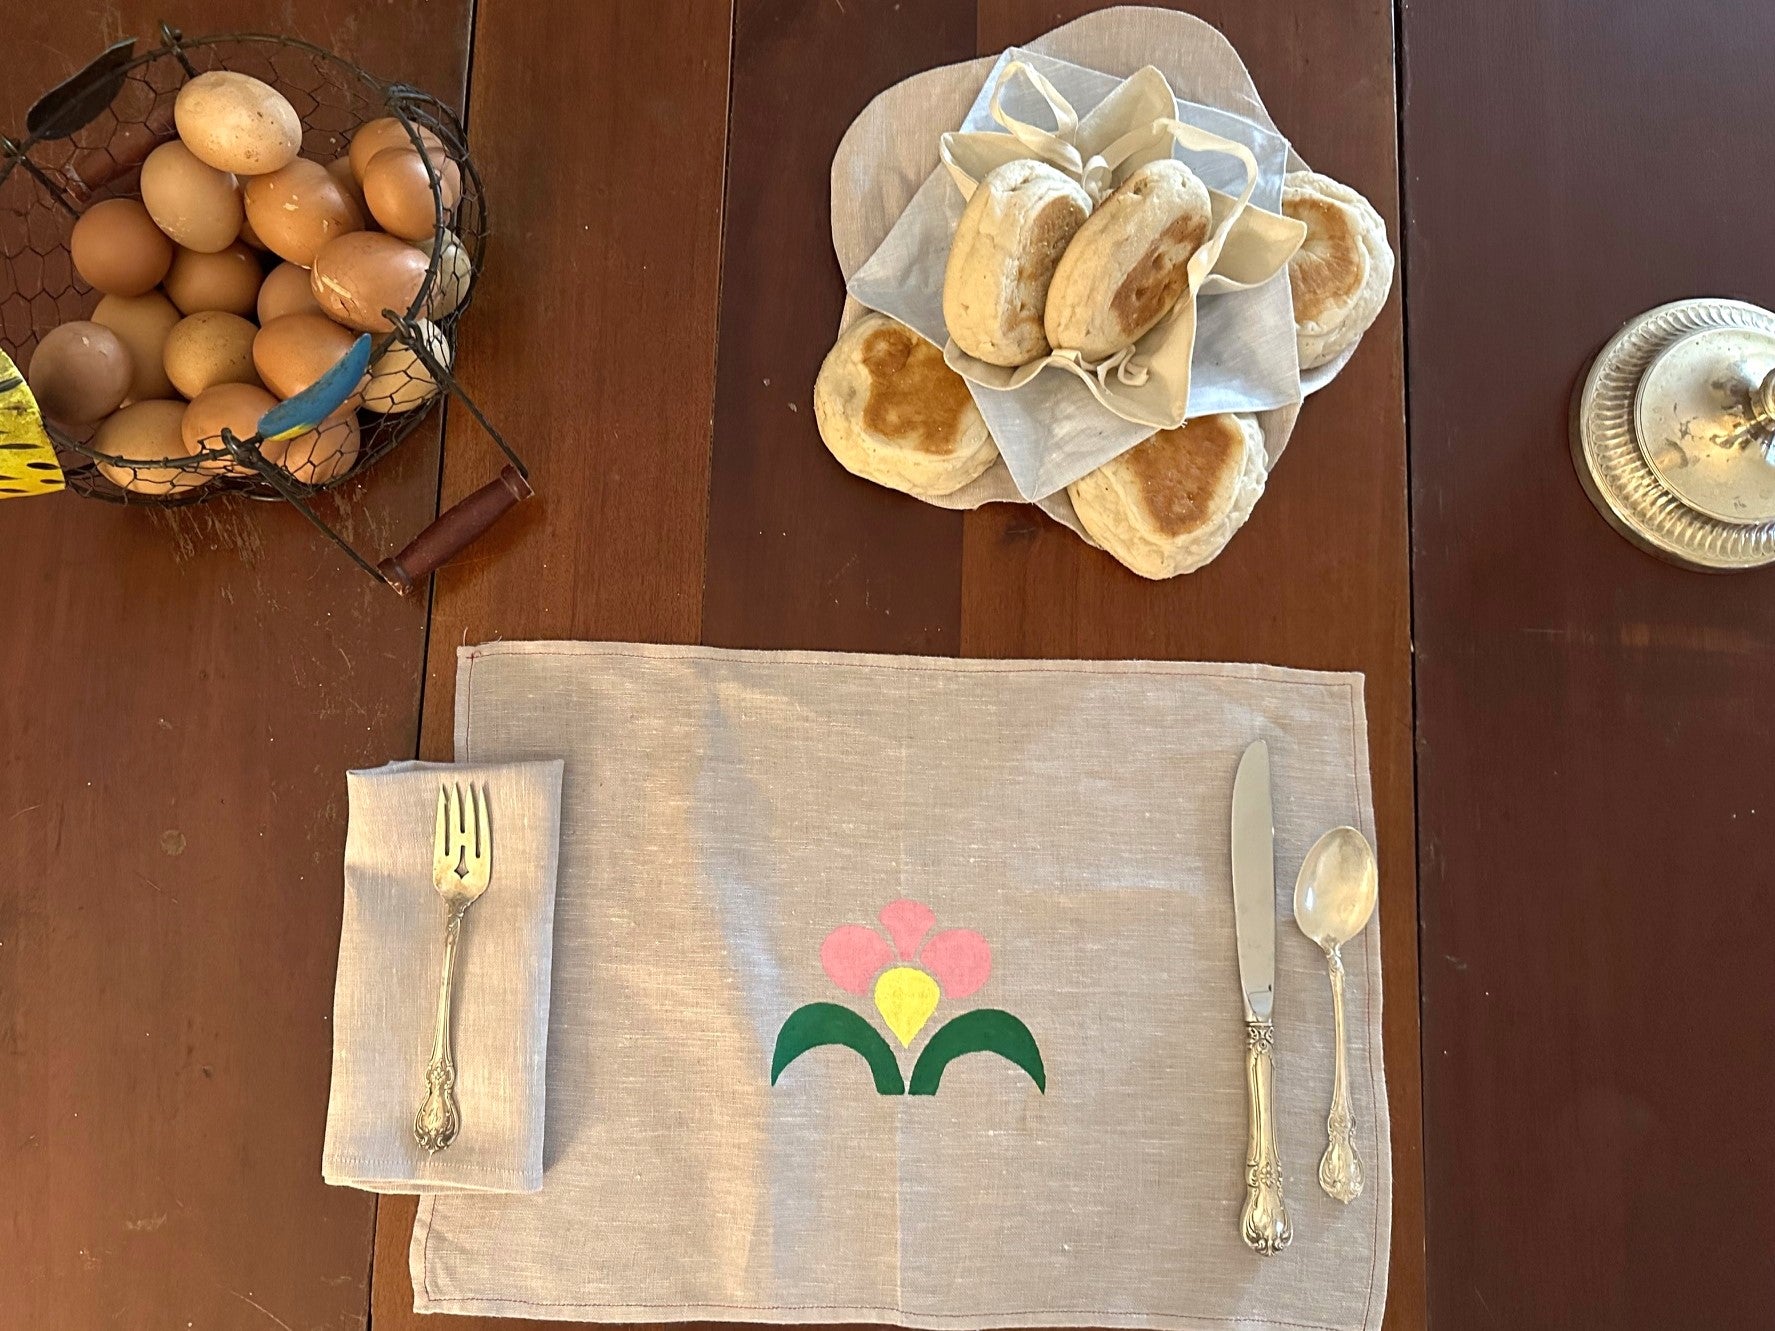 On a wooden table is a basket of eggs on the left top corner, biscuits in a biscuit cozy on the center top, a silver candle stick on the right top corner. On the center bottom there is a napkin with a silver fork on top, a placemat with a painted flower in pink yellow and green with a knife and spoon on top.